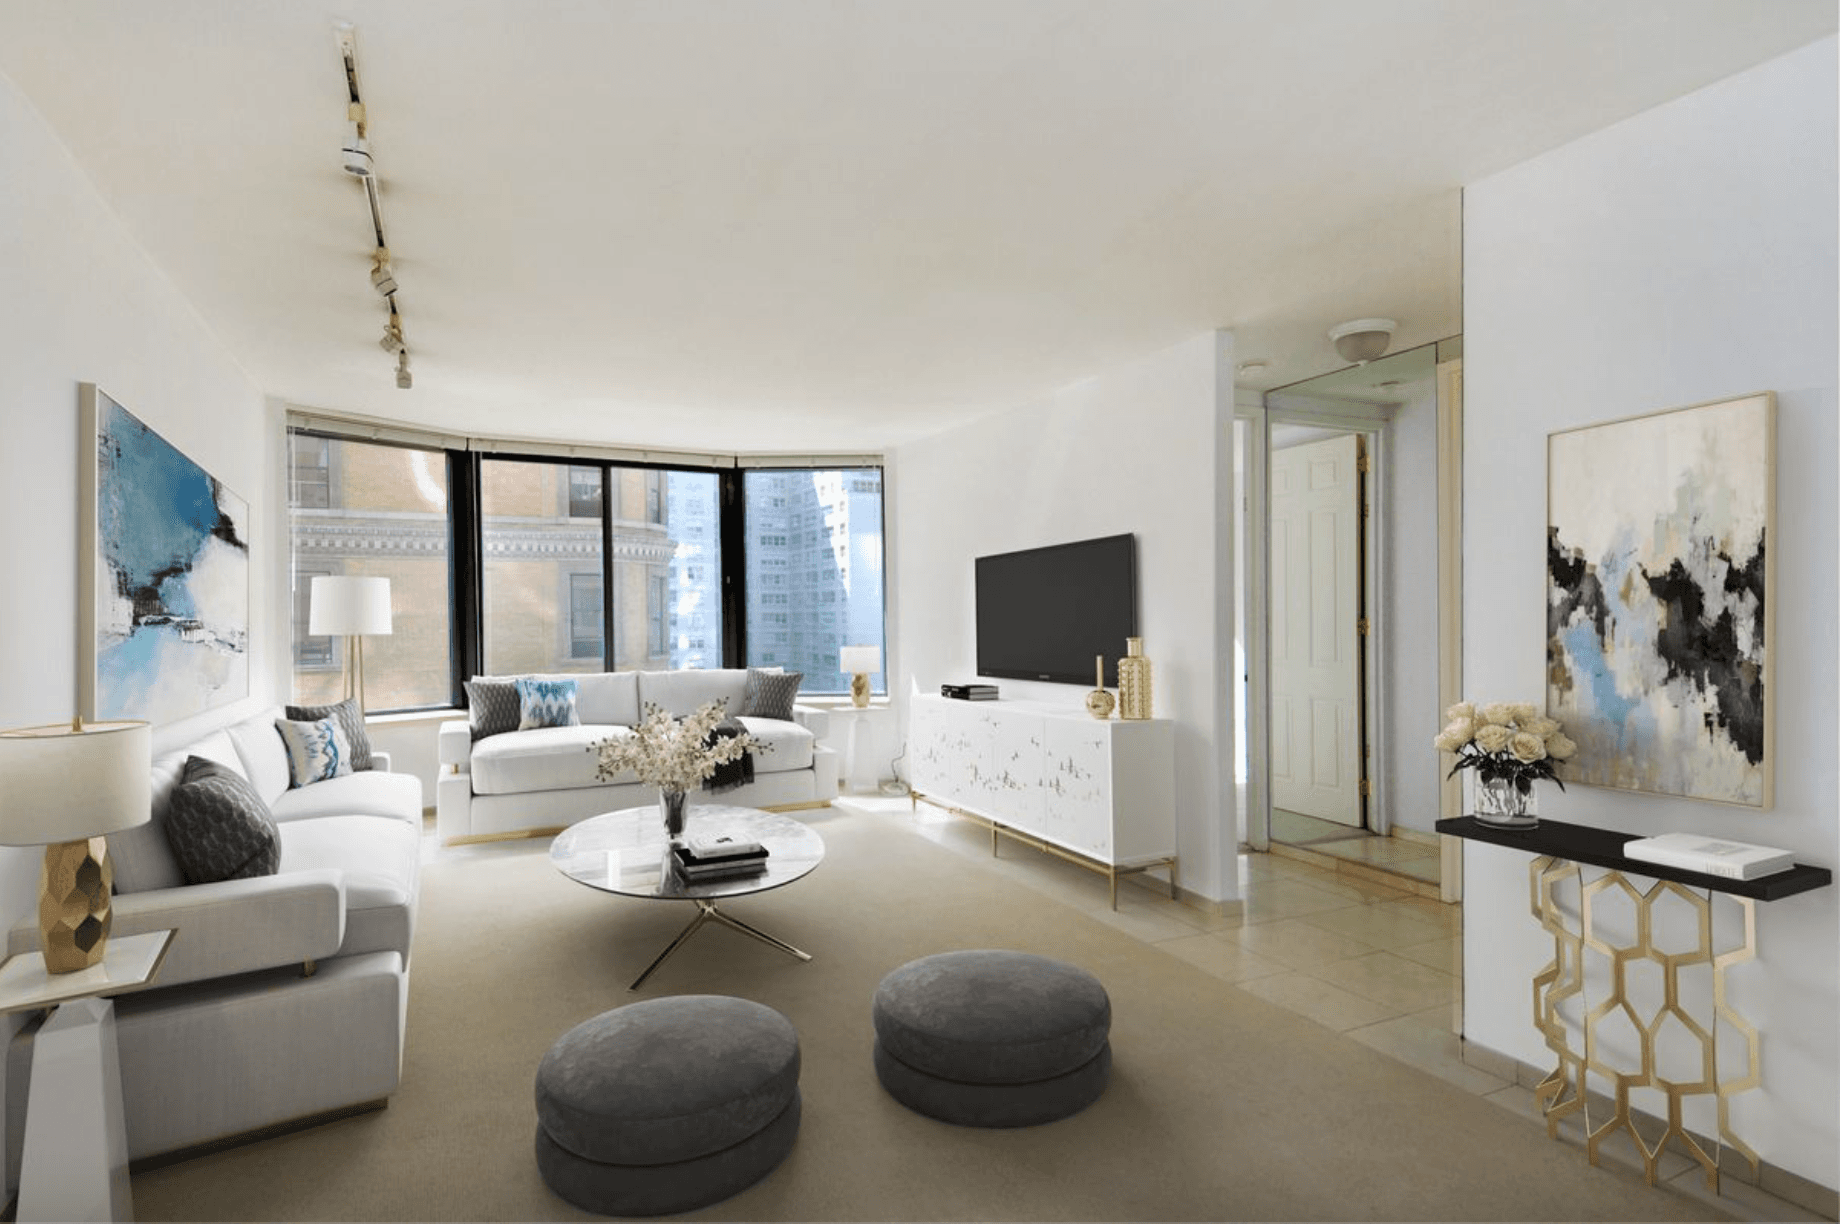 The Coronado split 2 Bedroom 2 bath with open views and southern exposure in the most sought after condominium on the Upper West Side.